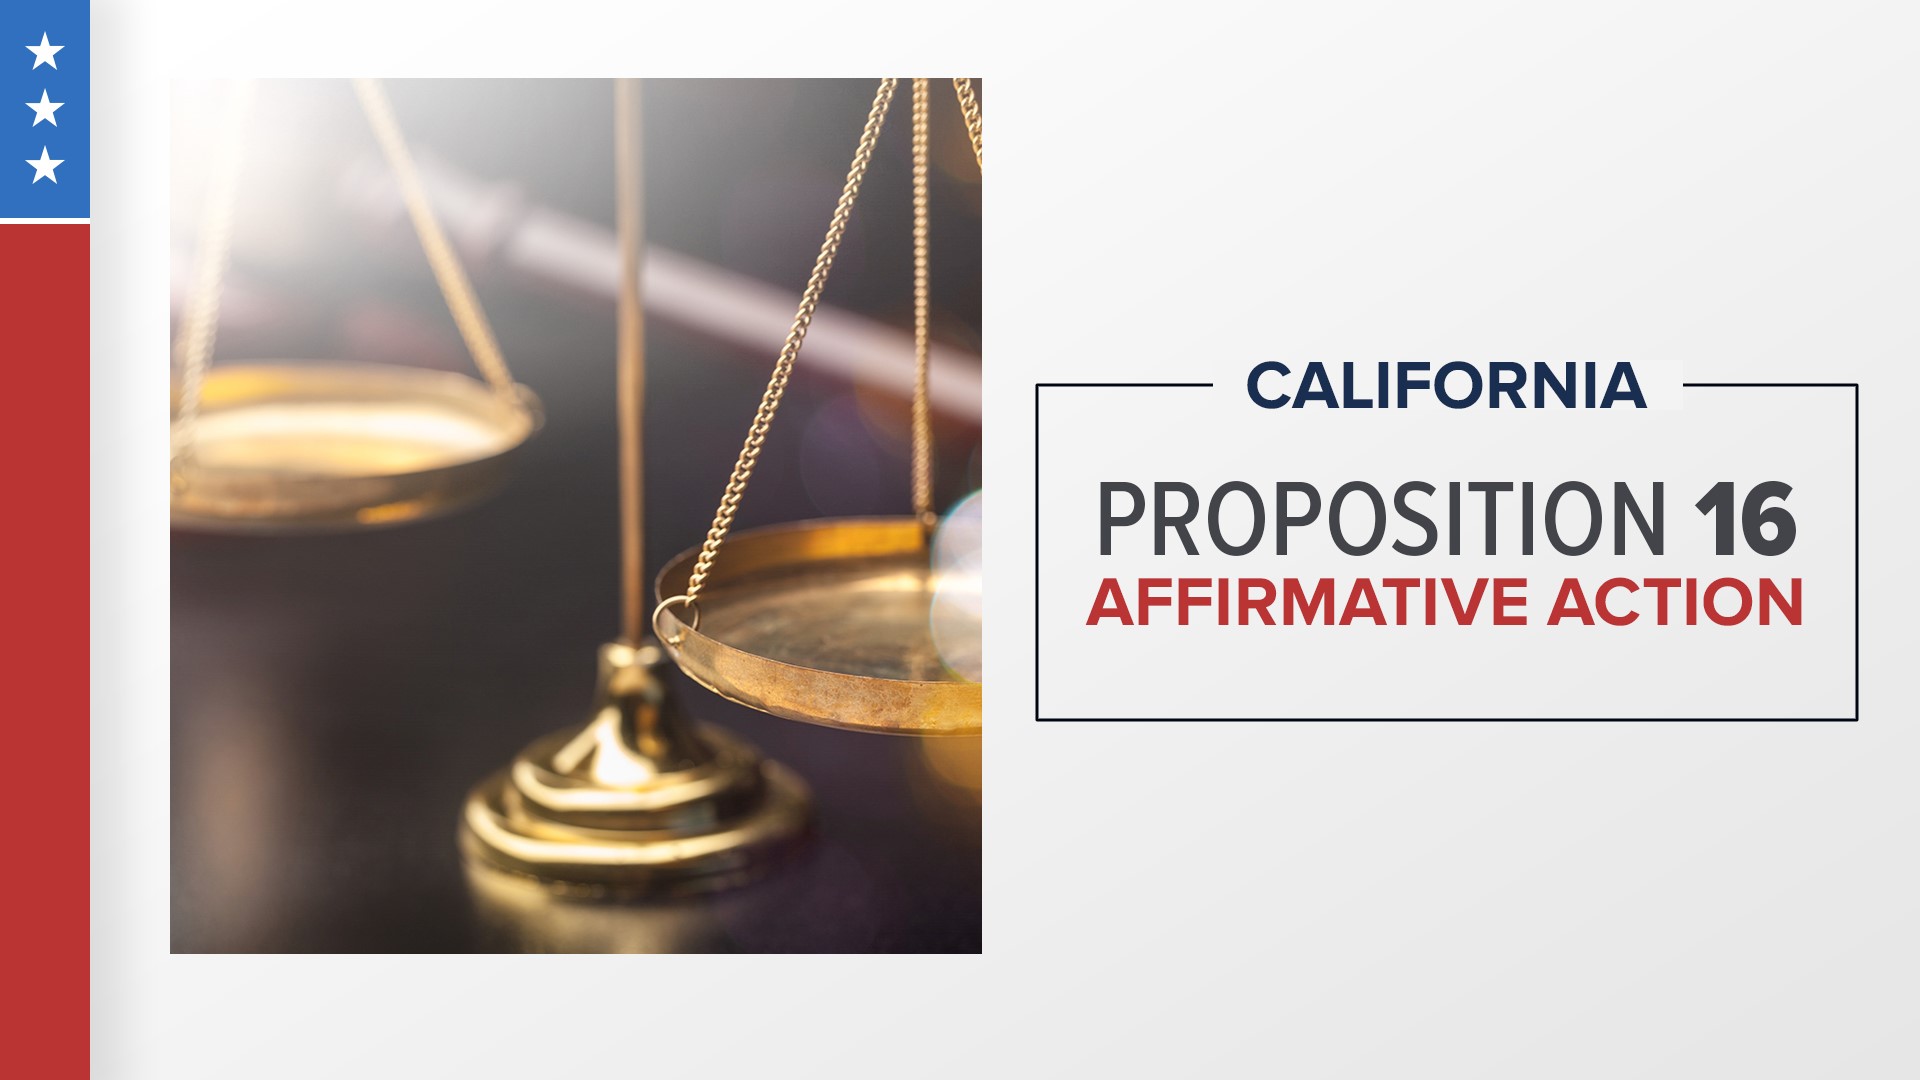 Proposition 16 is on the ballot to amend the Proposition 209 from 1996 to legalize affirmative action in California.